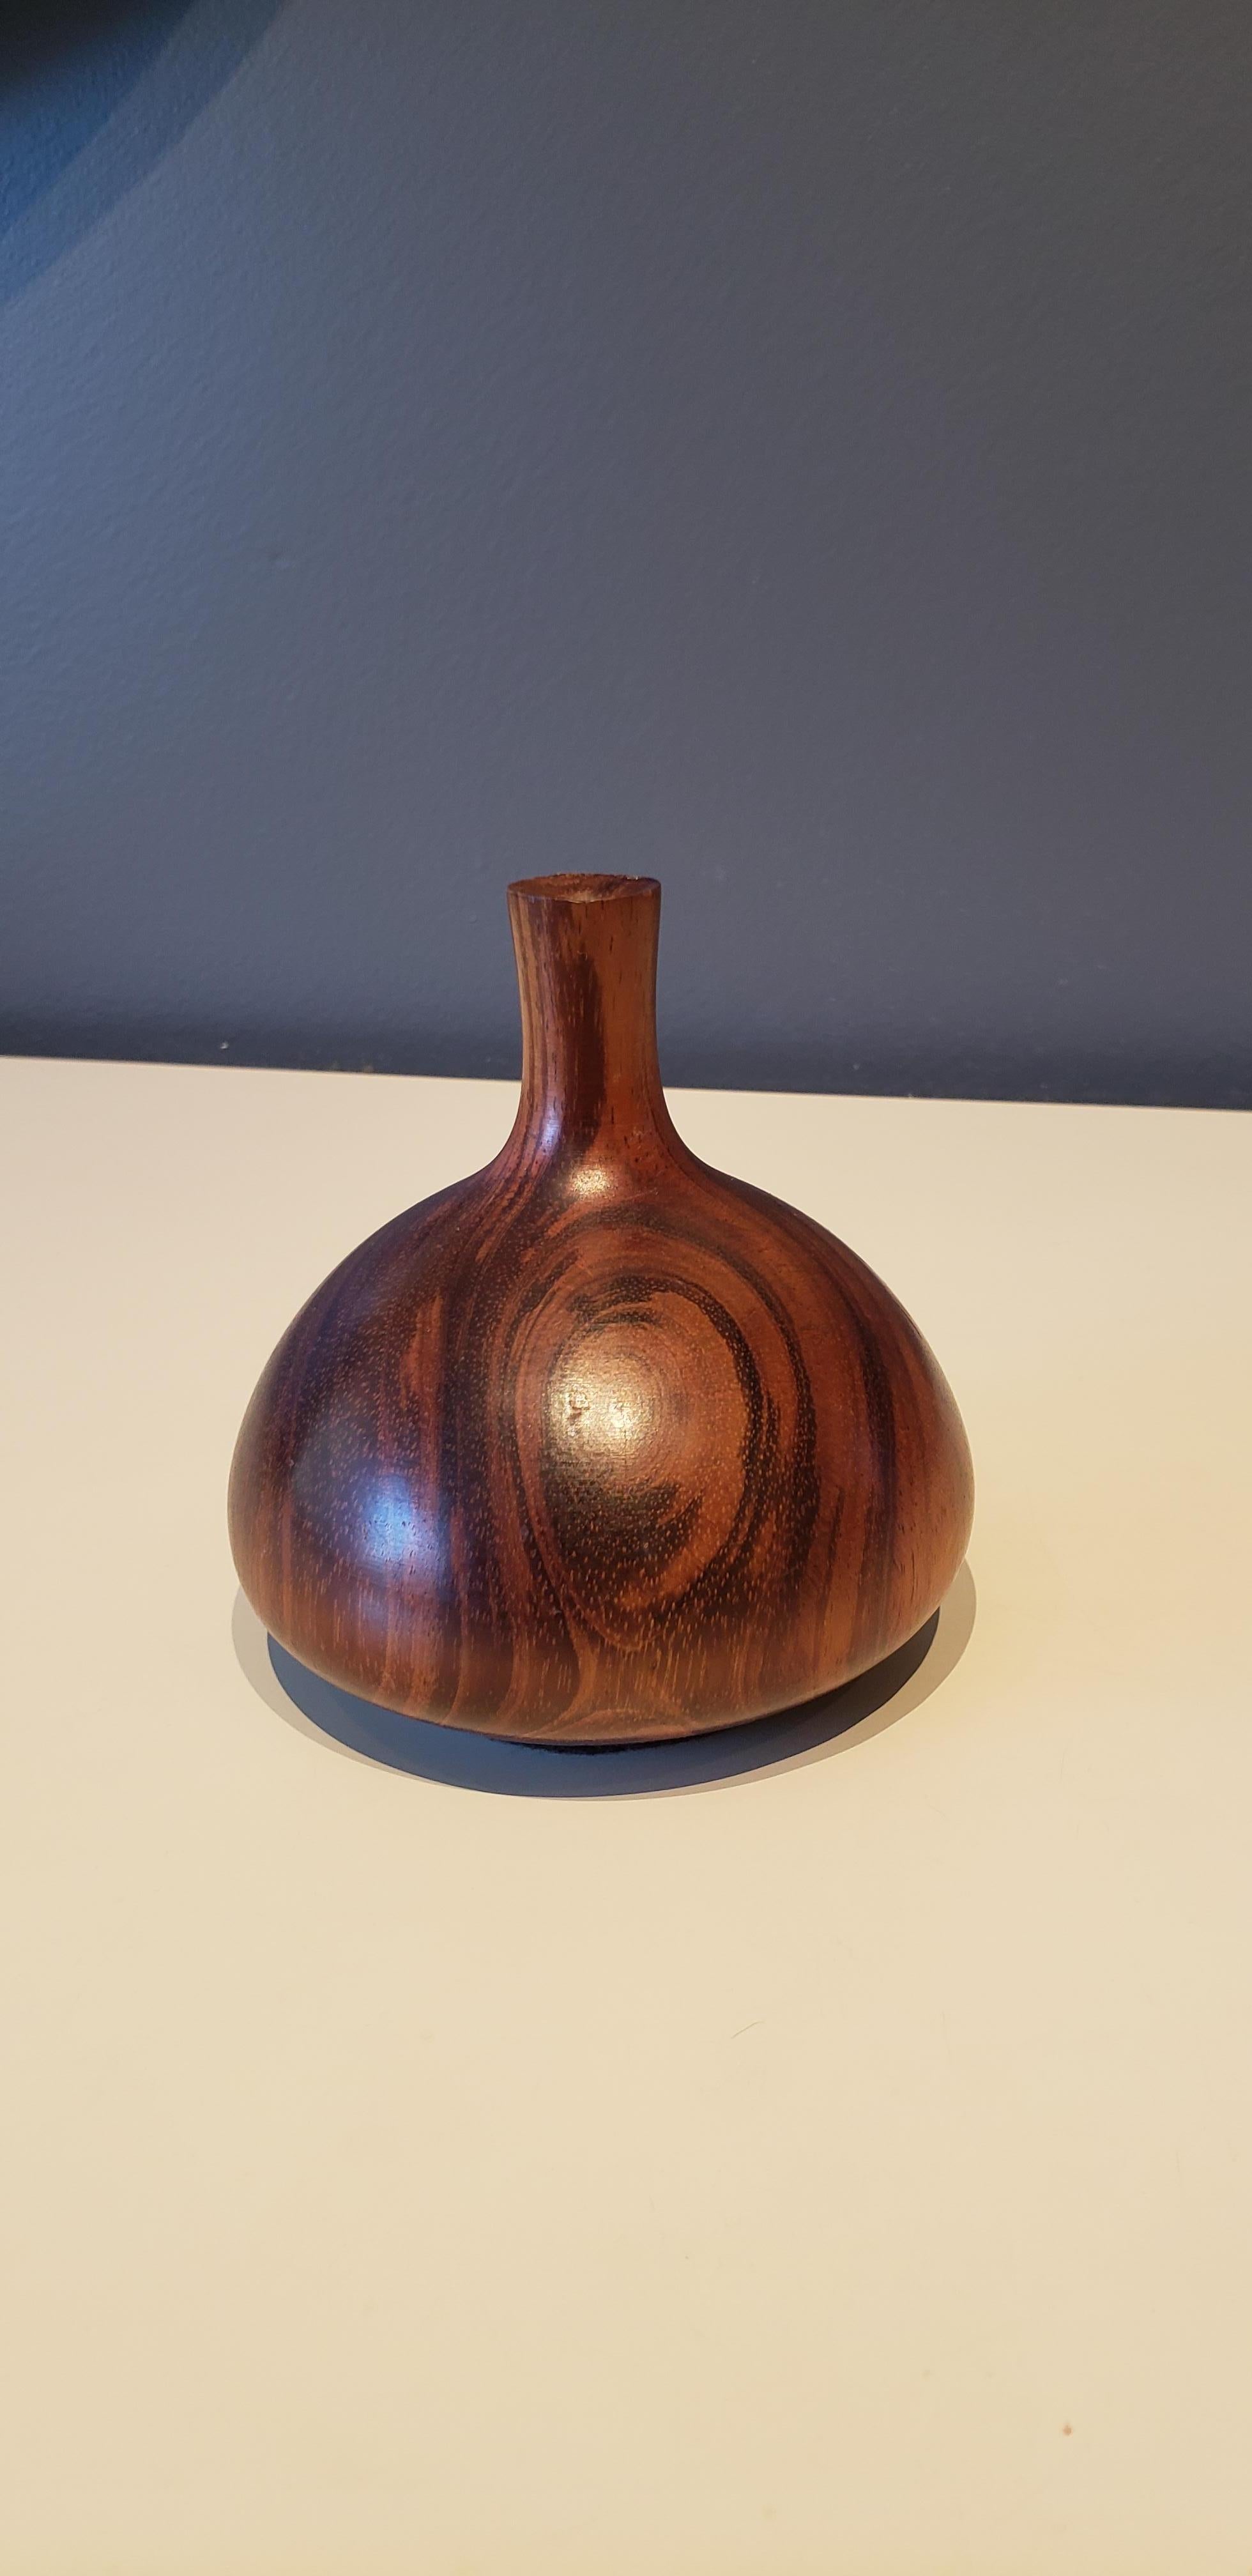 American Turned Wood Vase or Vessel Crafted by Rude Osolnik